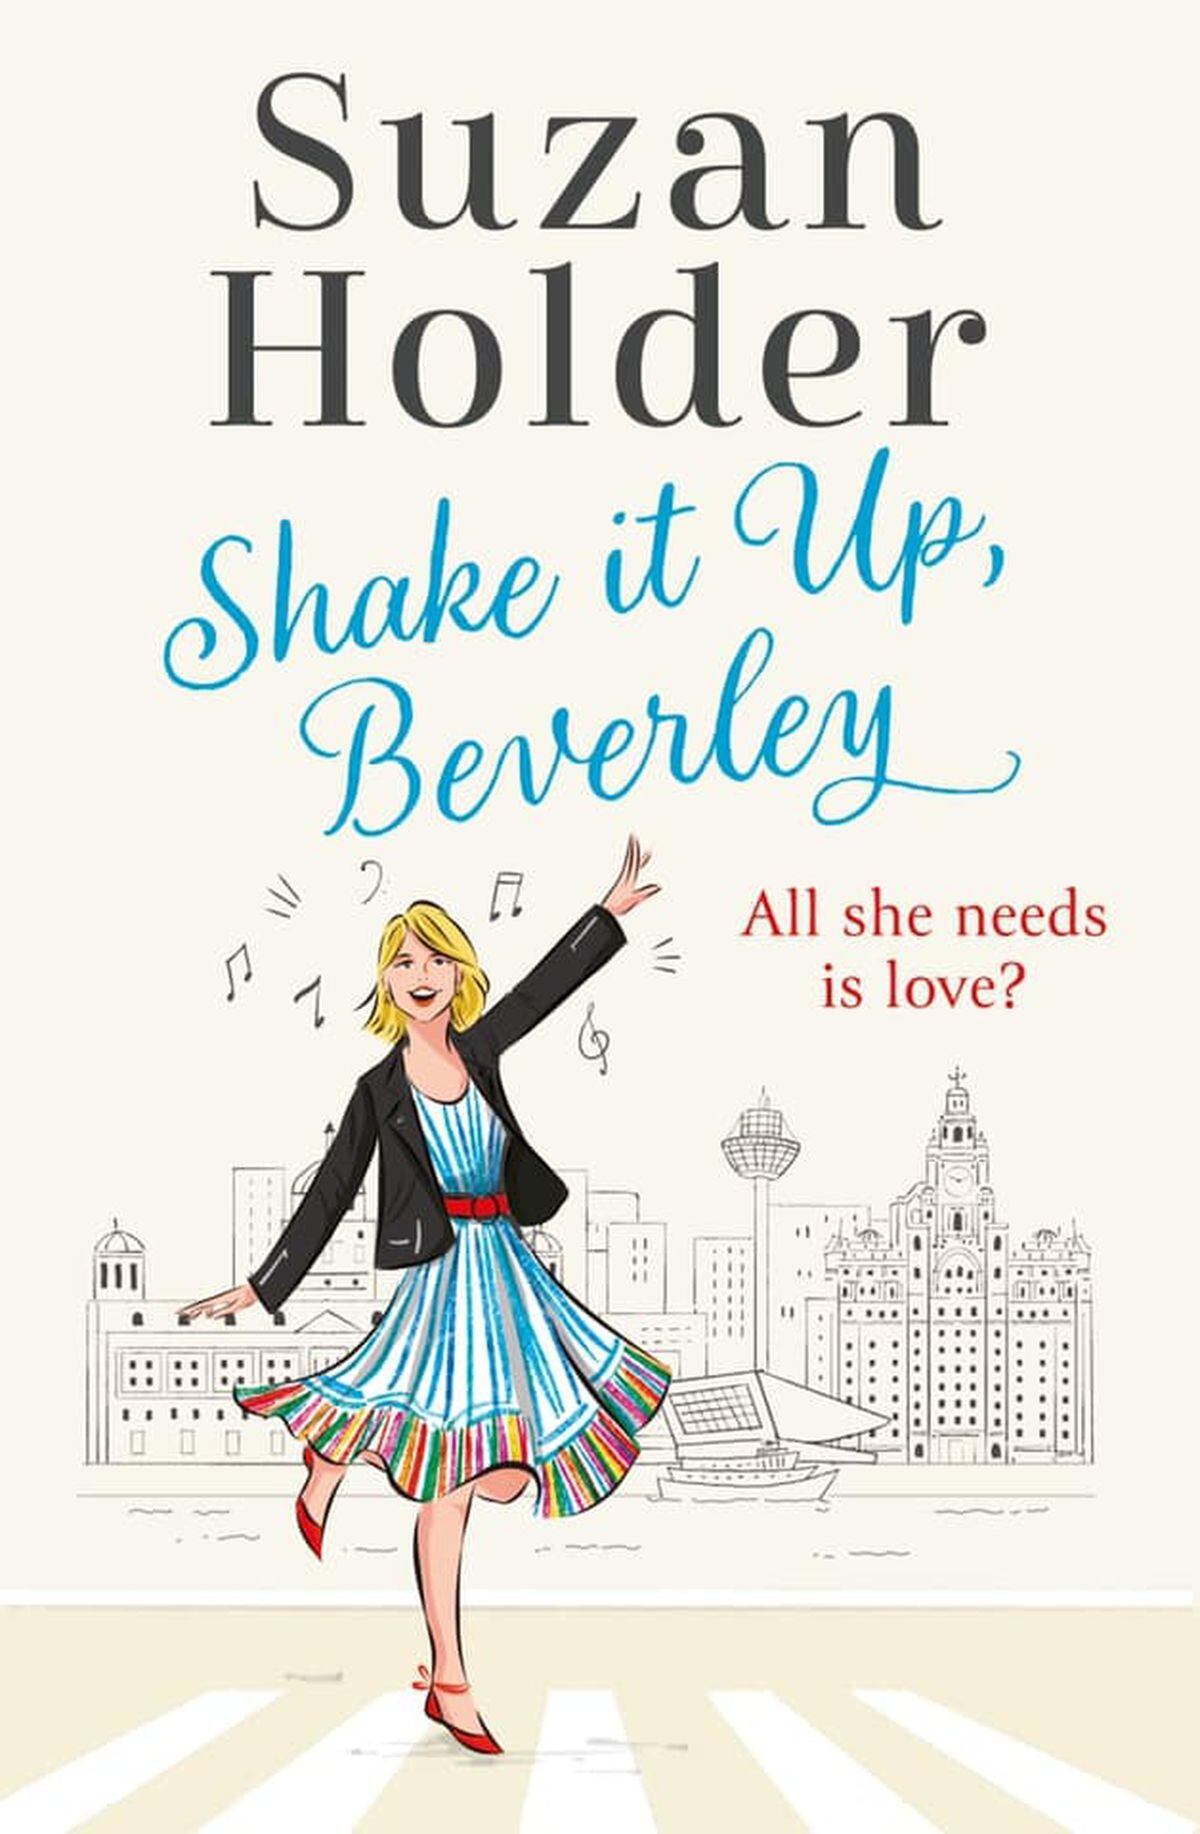 Suzan's book Shake it Up, Beverley